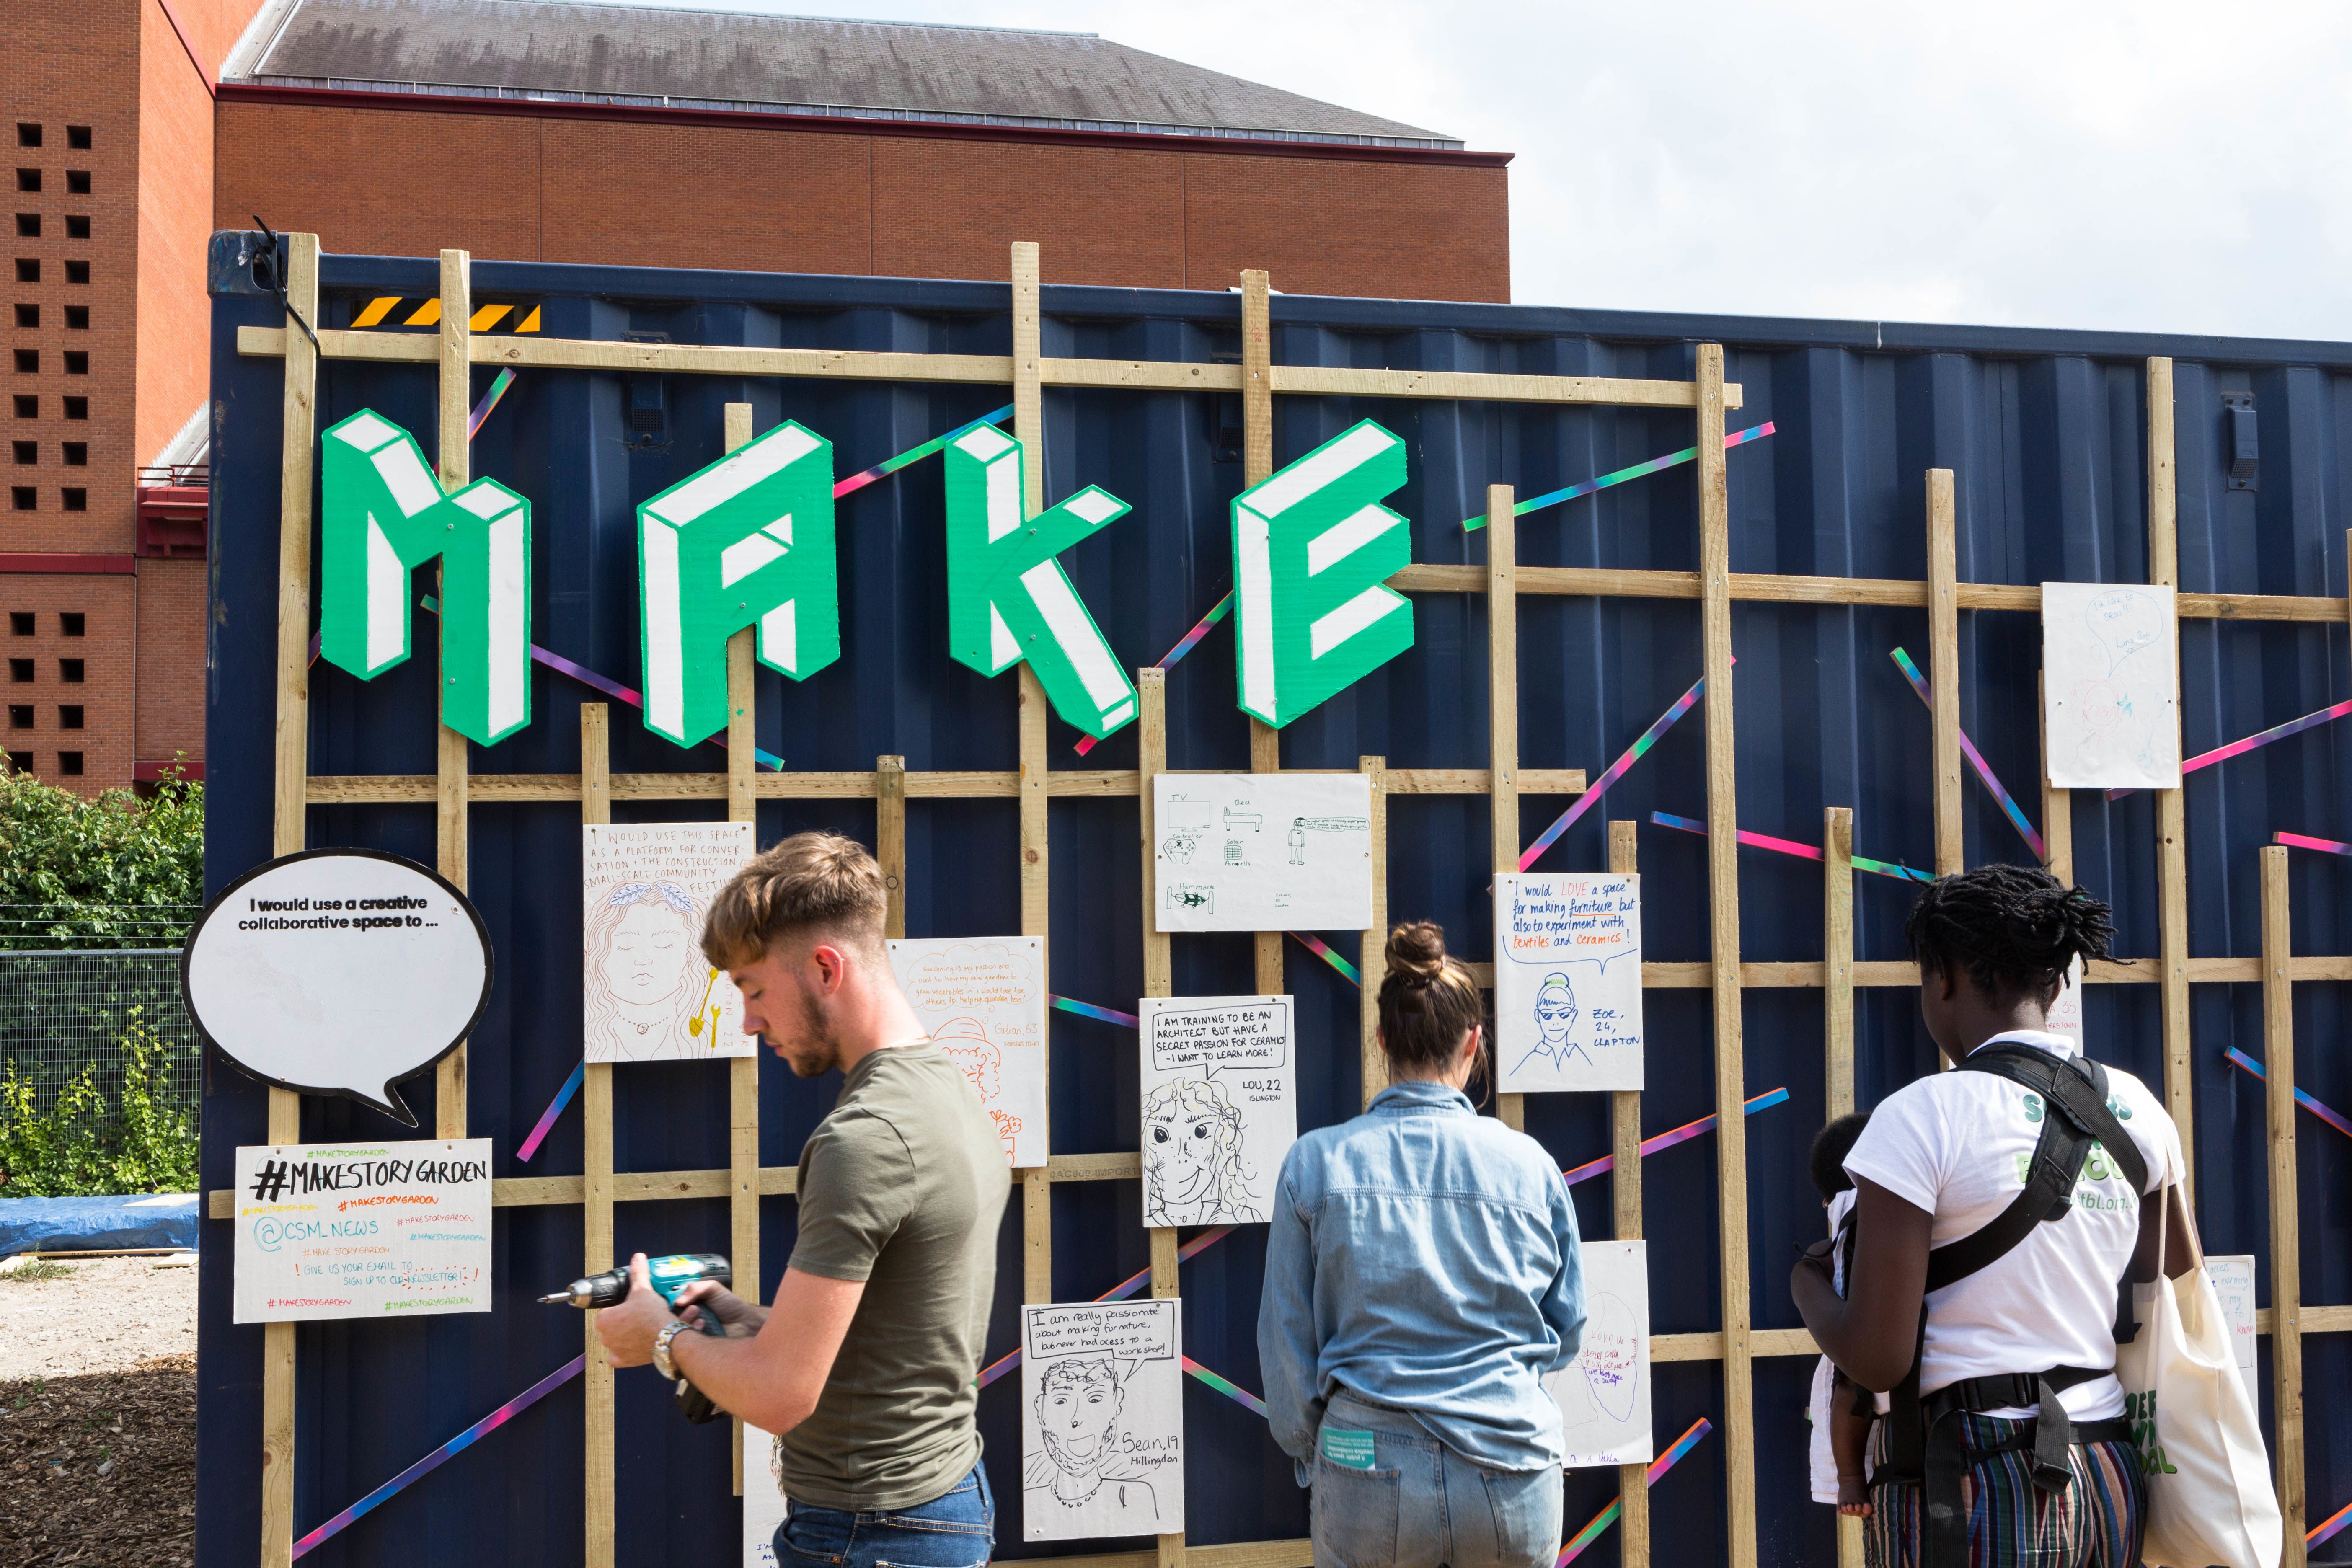 People in front of a shipping container with the letters MAKE in green caps and there is a trellis with hanging sheets of A4 and they are writing on some of them